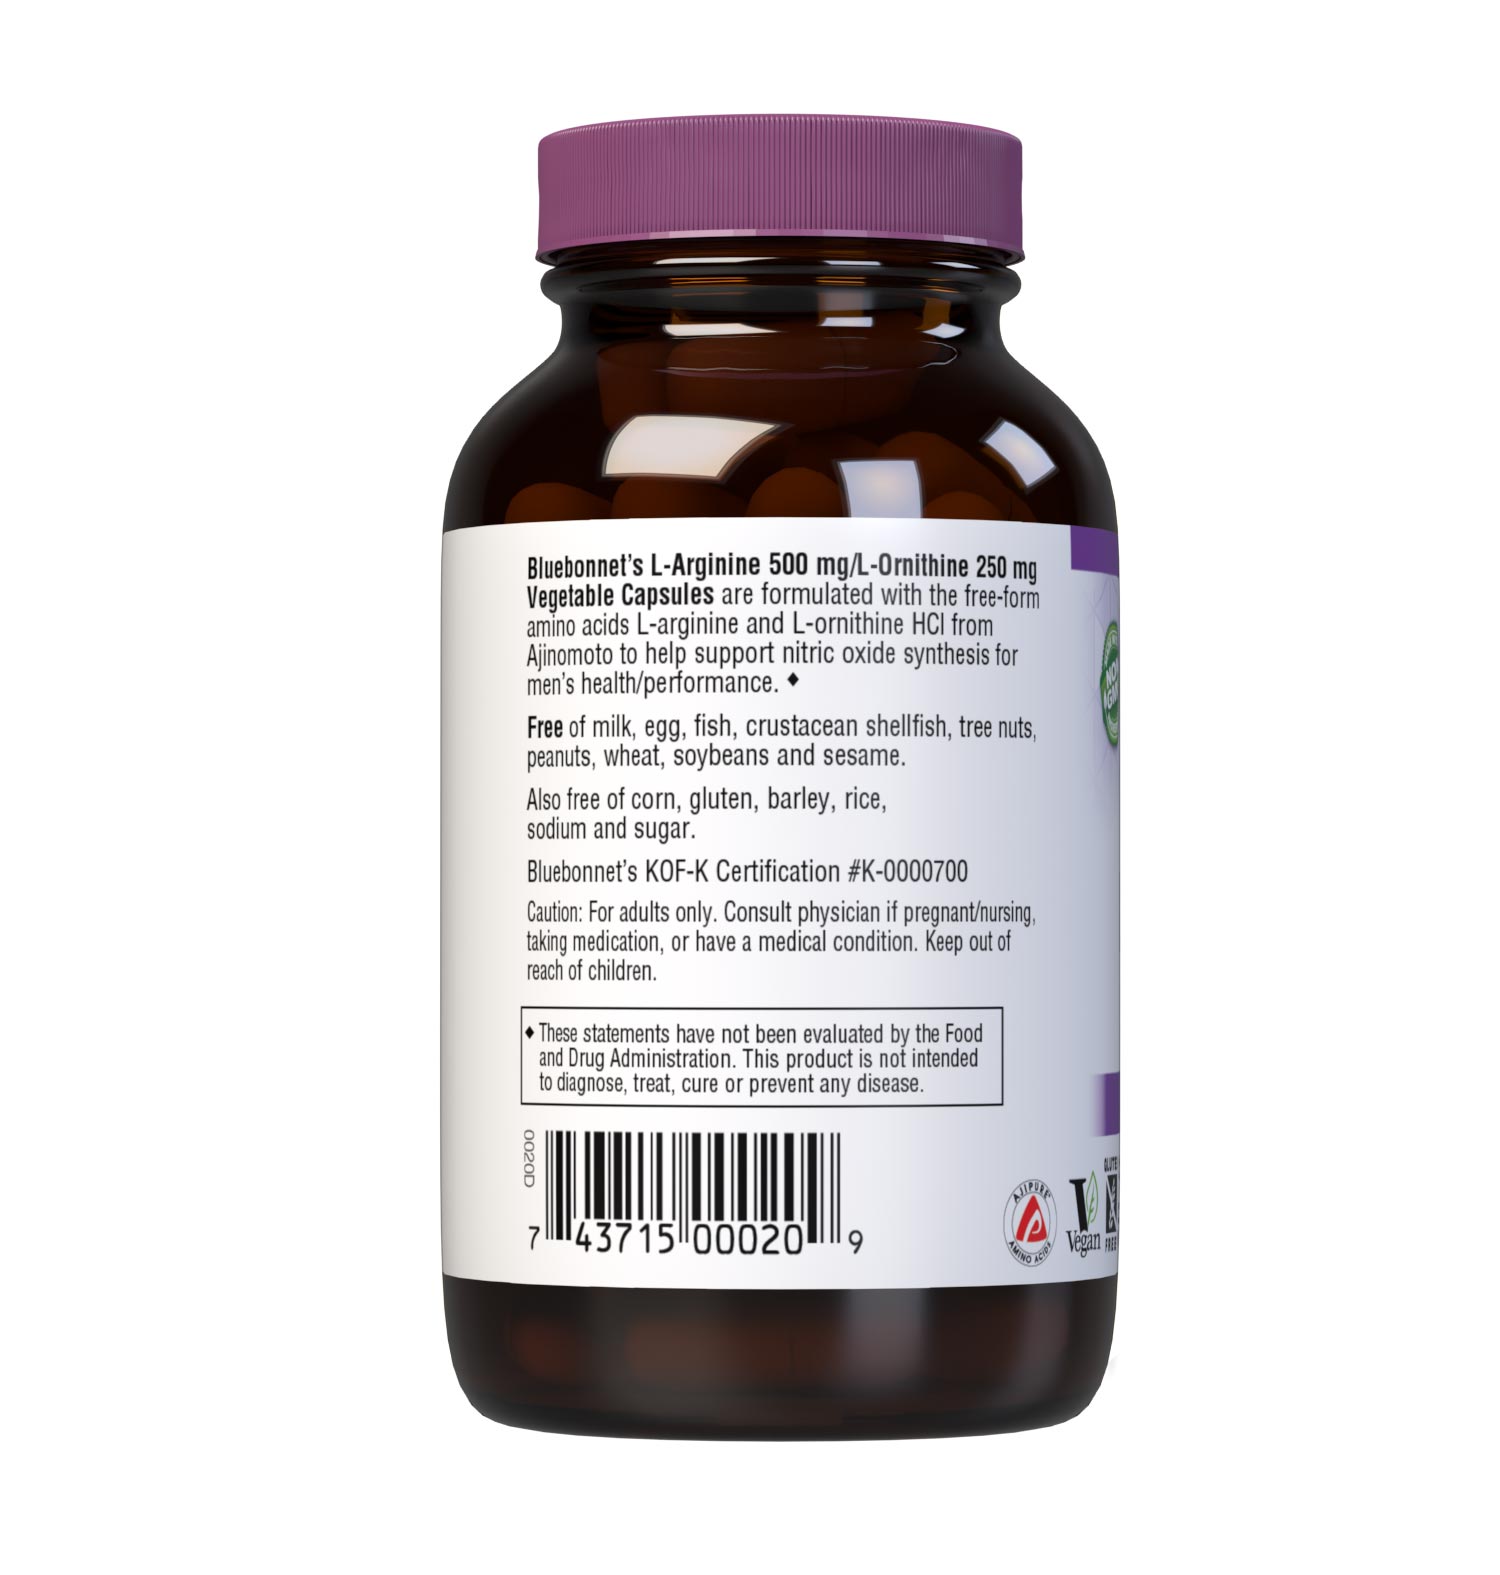 Bluebonnet’s L-Arginine 500 mg/L-Ornithine 250 mg 50 Vegetable Capsules provide the pharmaceutical grade, free-form amino acids L-arginine and L-ornithine HCI in their crystalline form from Ajinomoto. description panel. #size_50 count